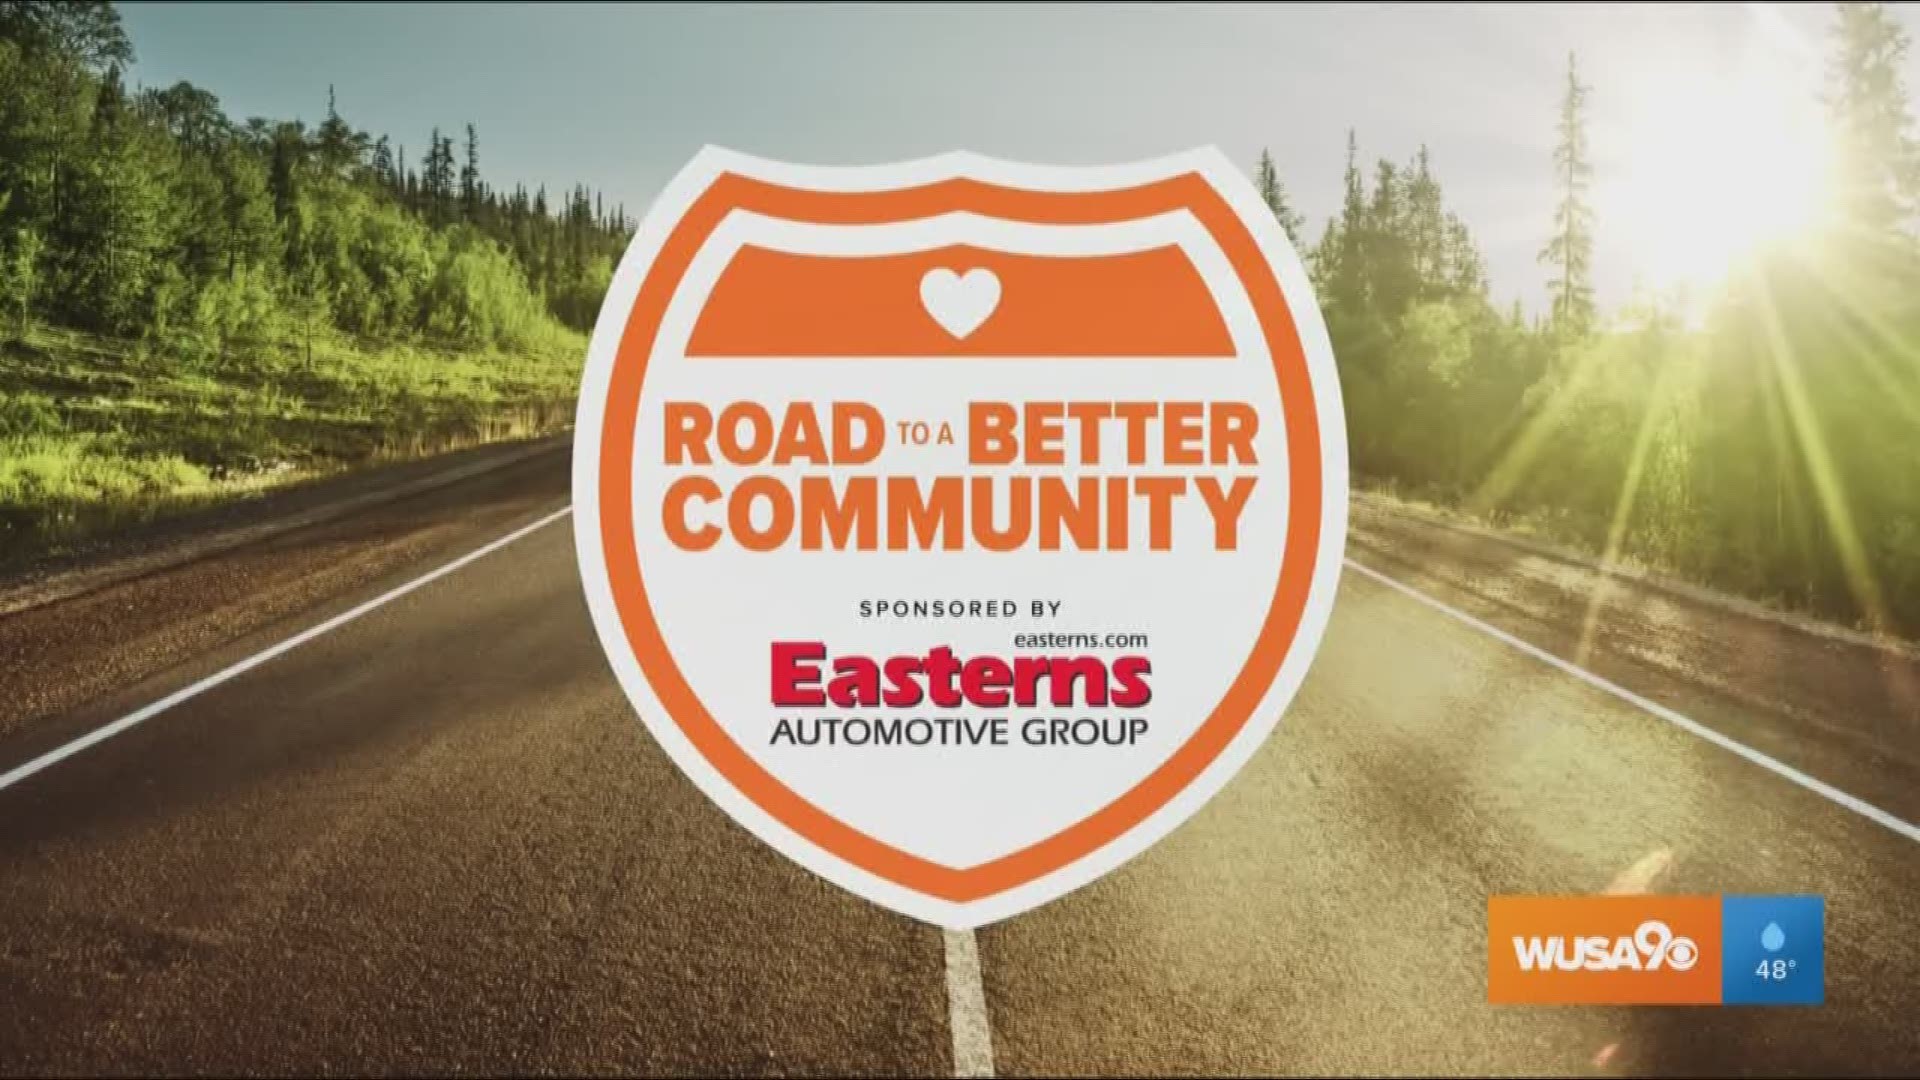 The work of the Easterseals supports children and adults of differing abilities in the community. Sponsored by Easterns Automotive Group.